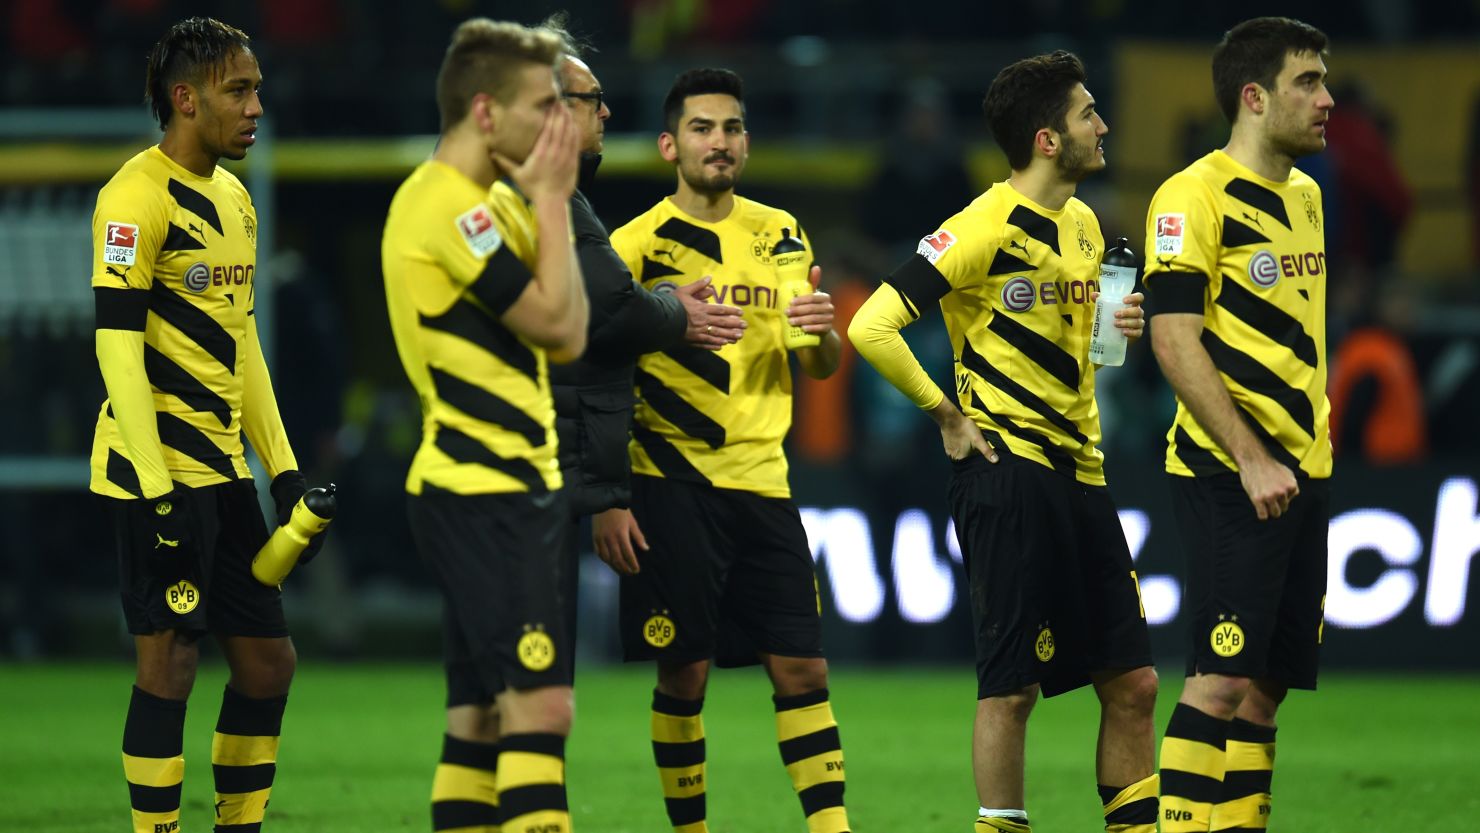 Borussia Dortmund players react to their 1-0 defeat against Augsburg Wednesday.